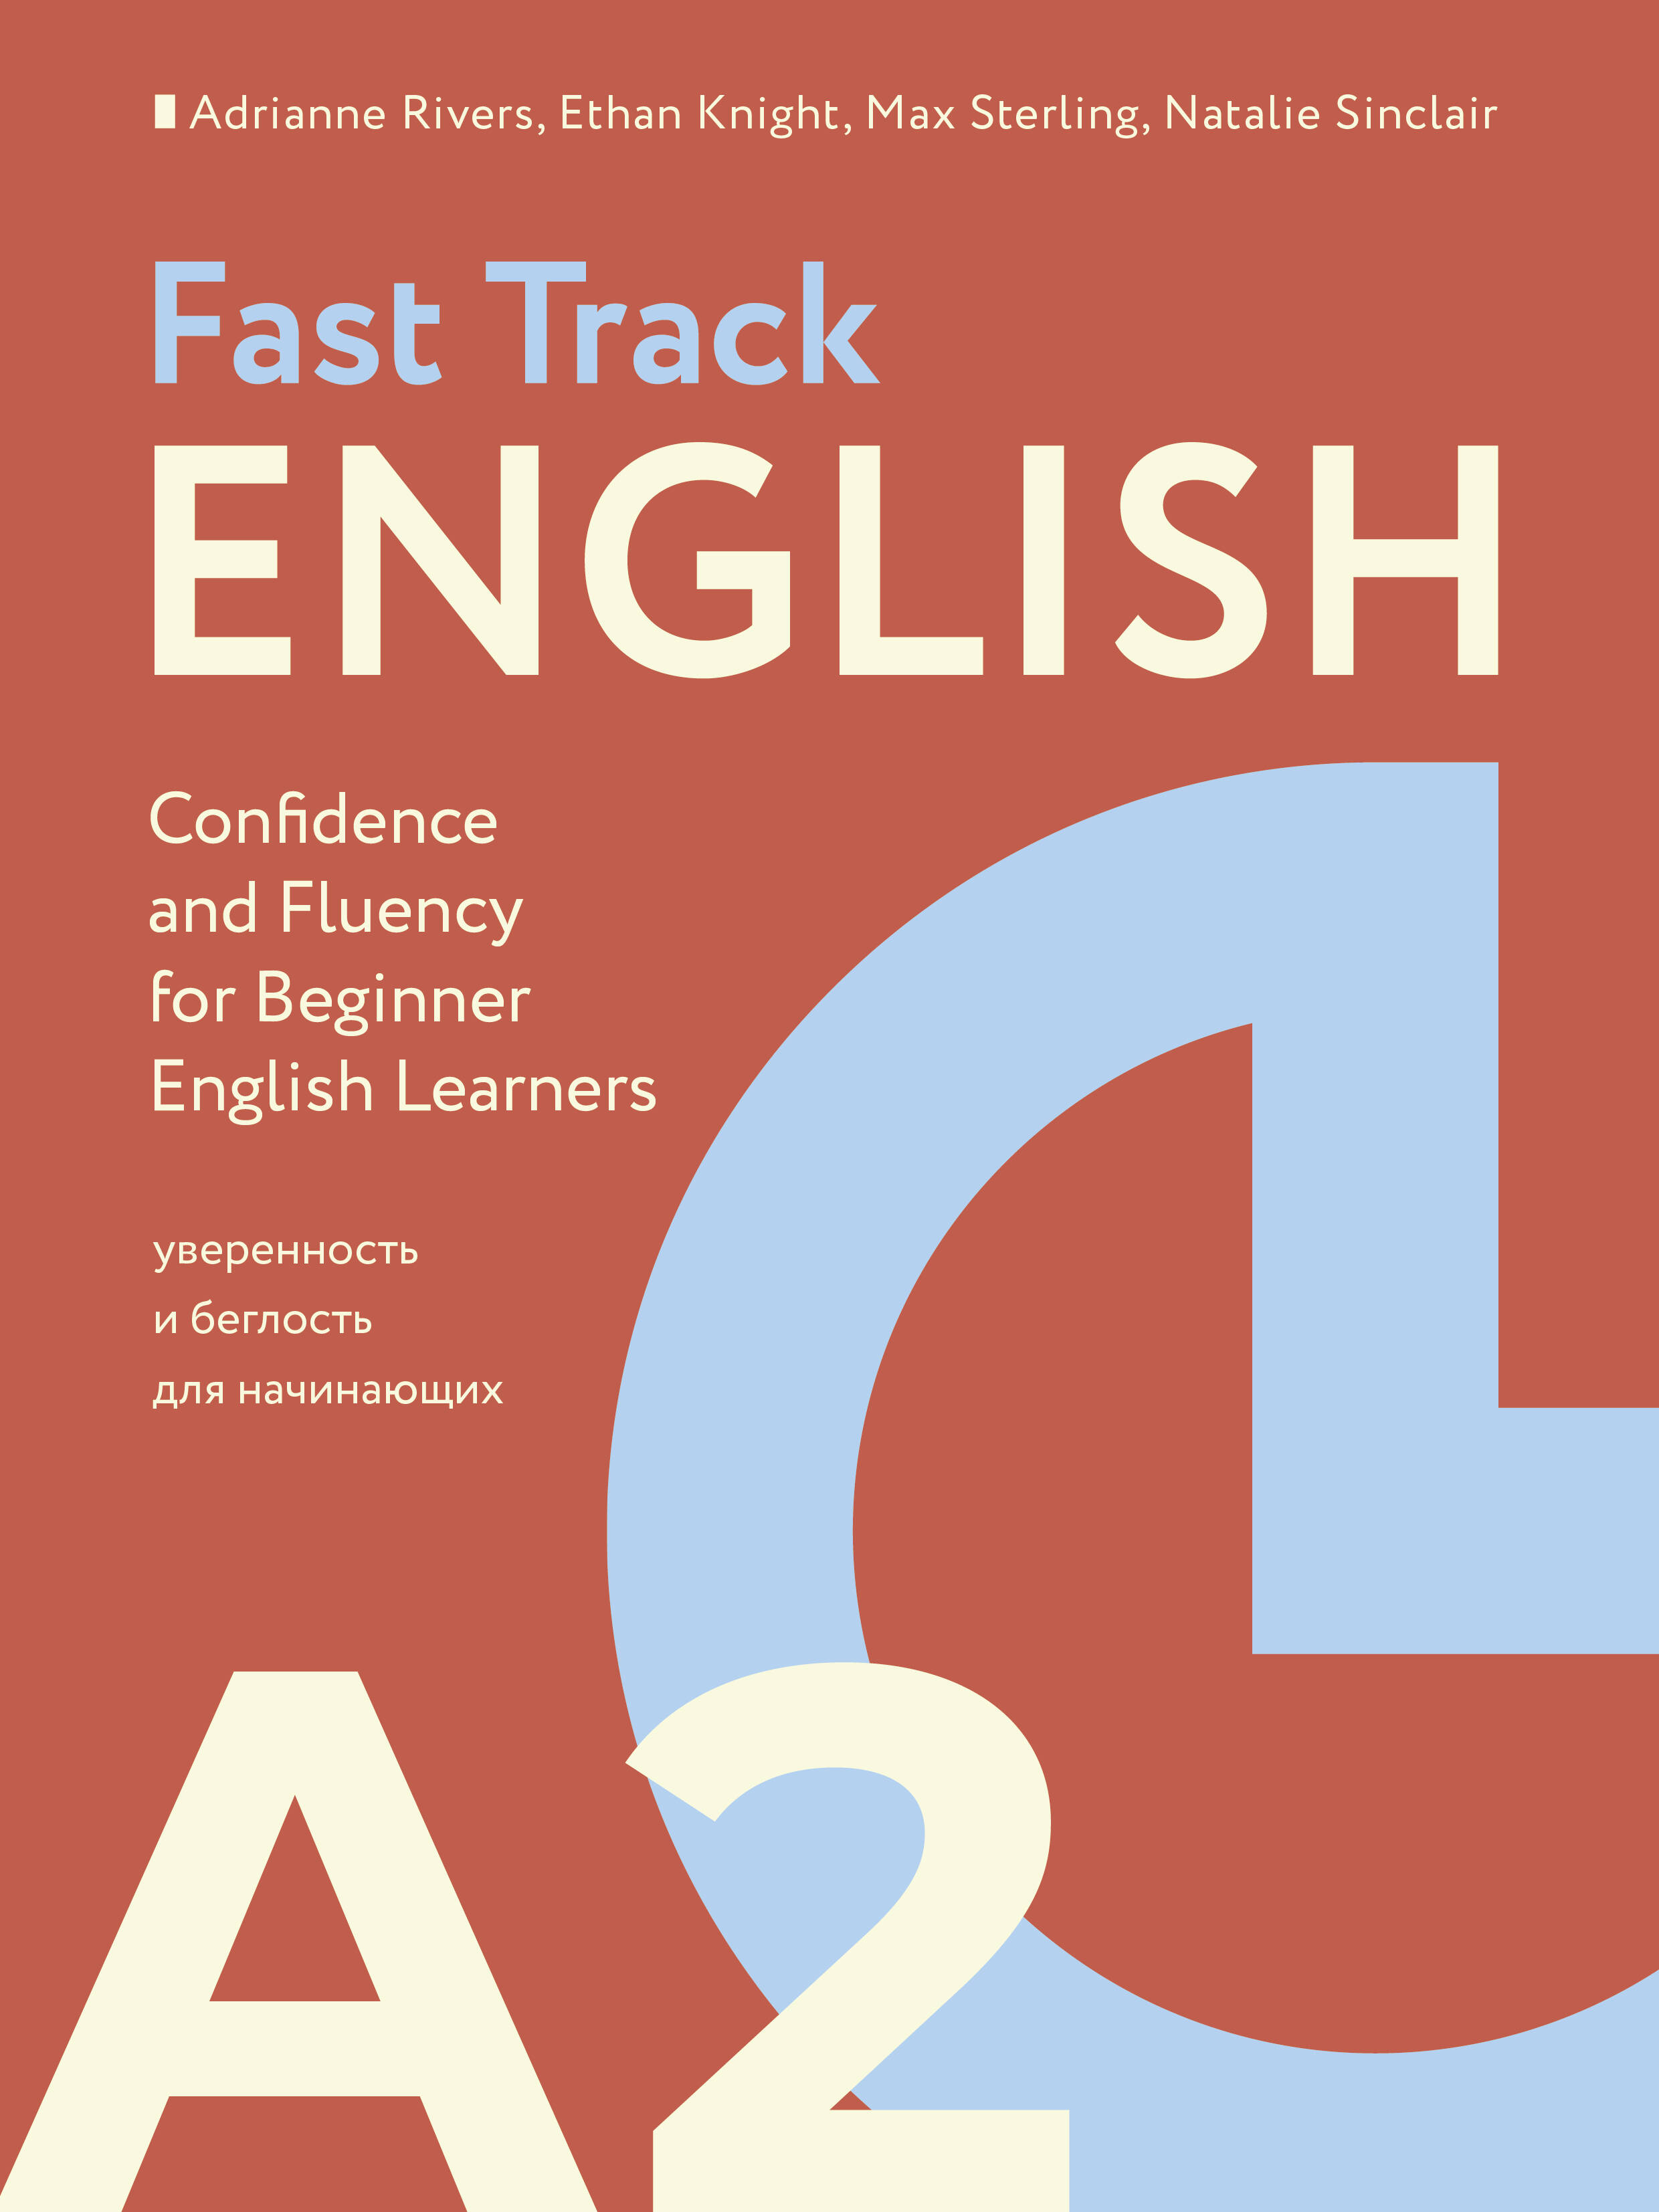 Fast Track English A2:      (Confidence and Fluency for Beginner English Learners)